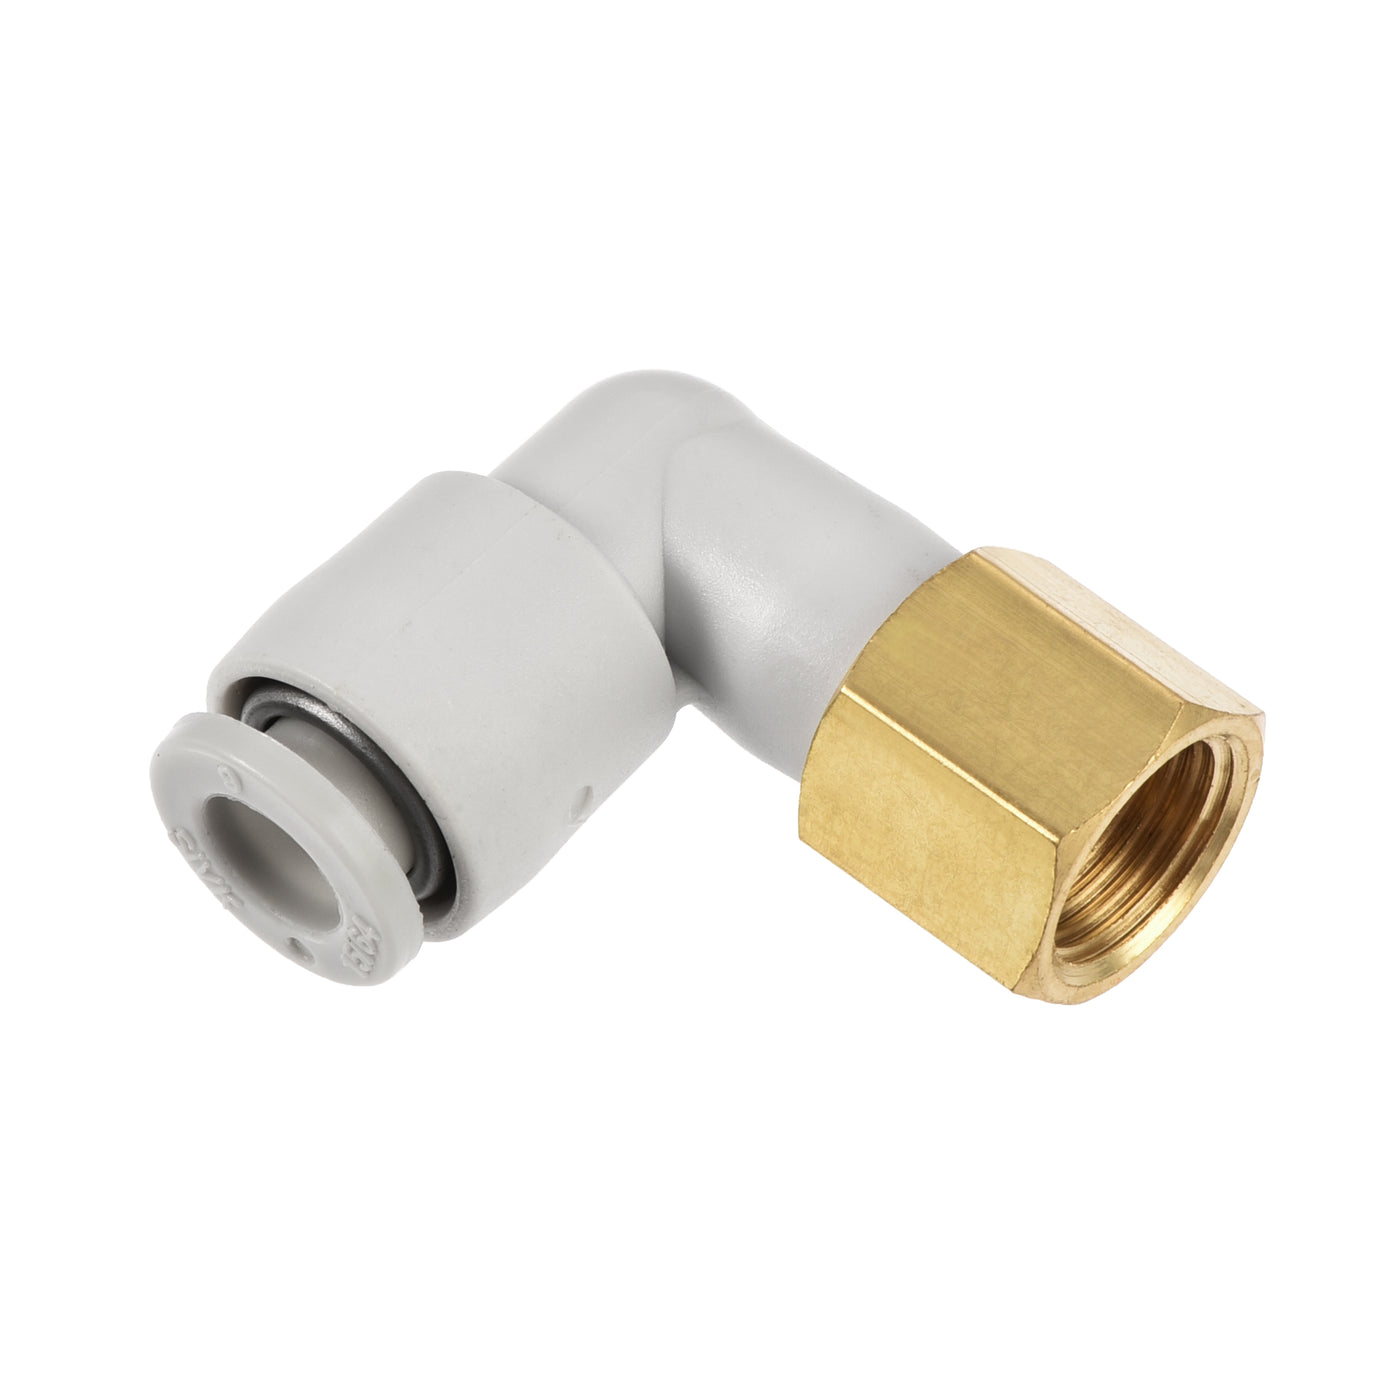 uxcell Uxcell Pneumatic Push to Connect Tube Fittings Elbow 6mm Tube OD x 1/8PT Female 2Pcs